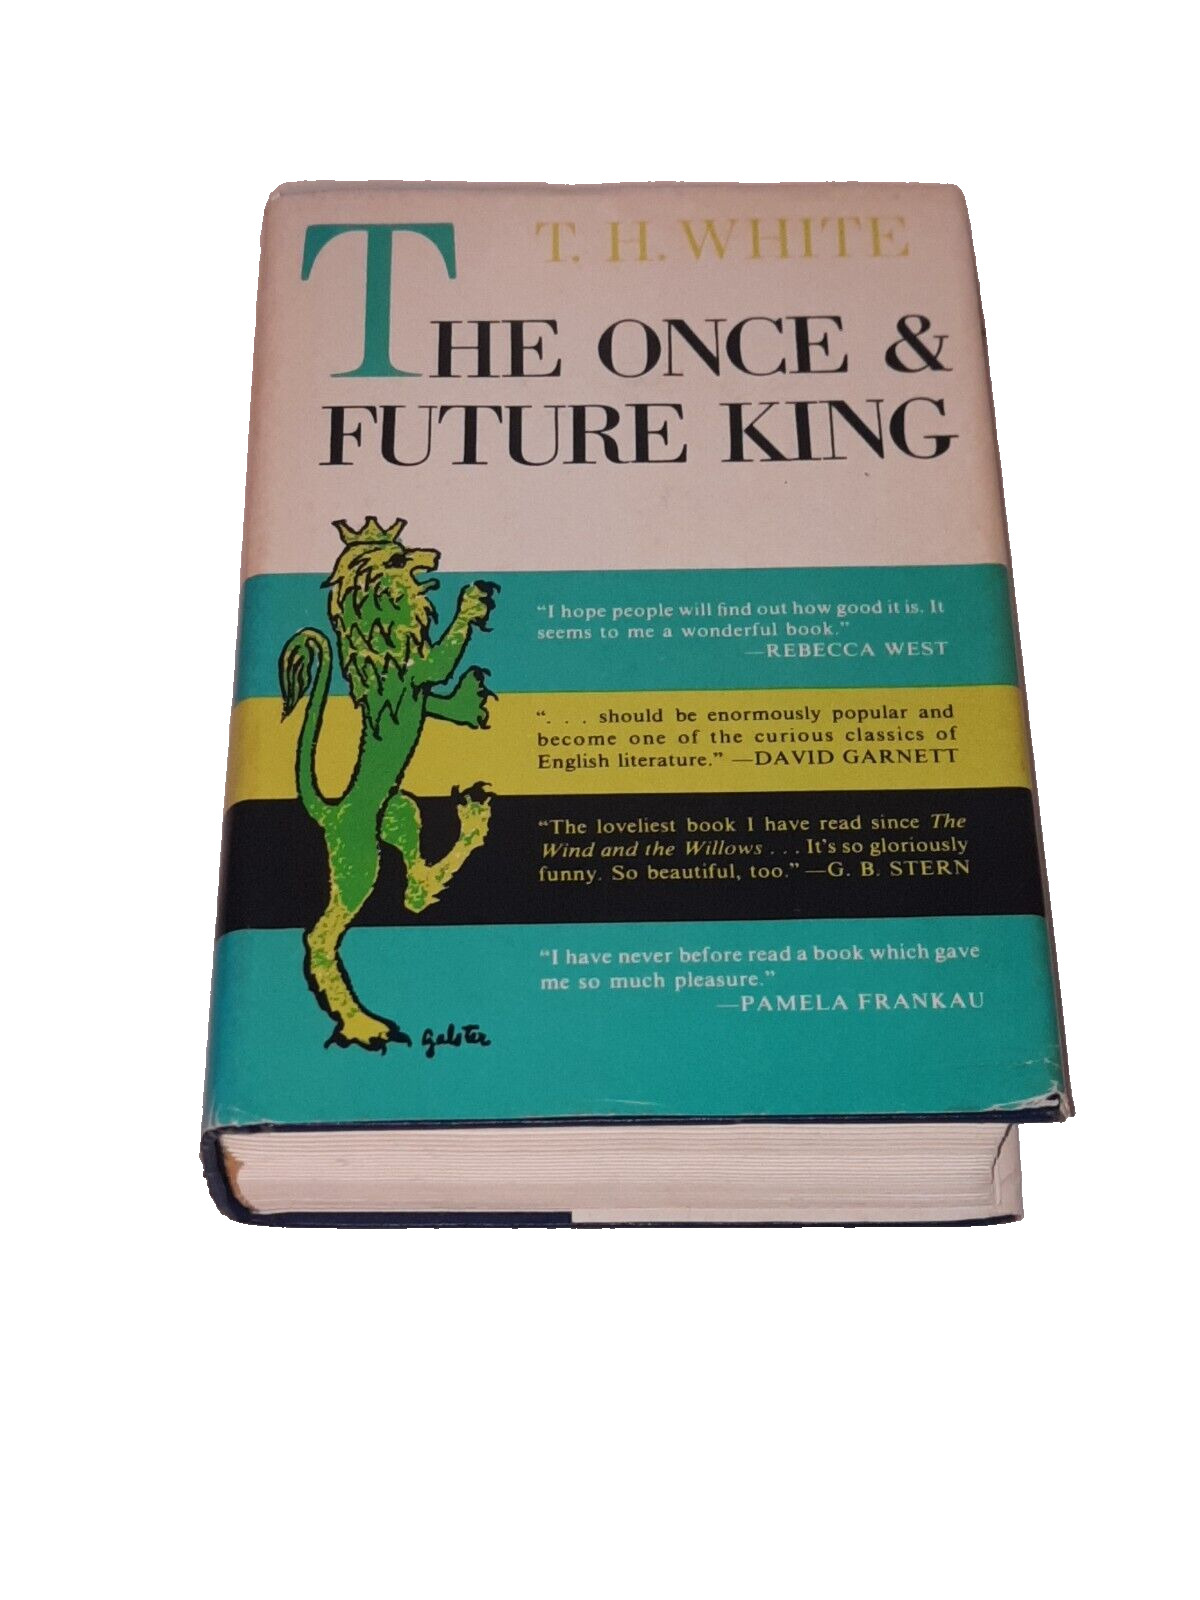 The Once & Future King T.H. White 1958 Book Club Edition Hardcover 